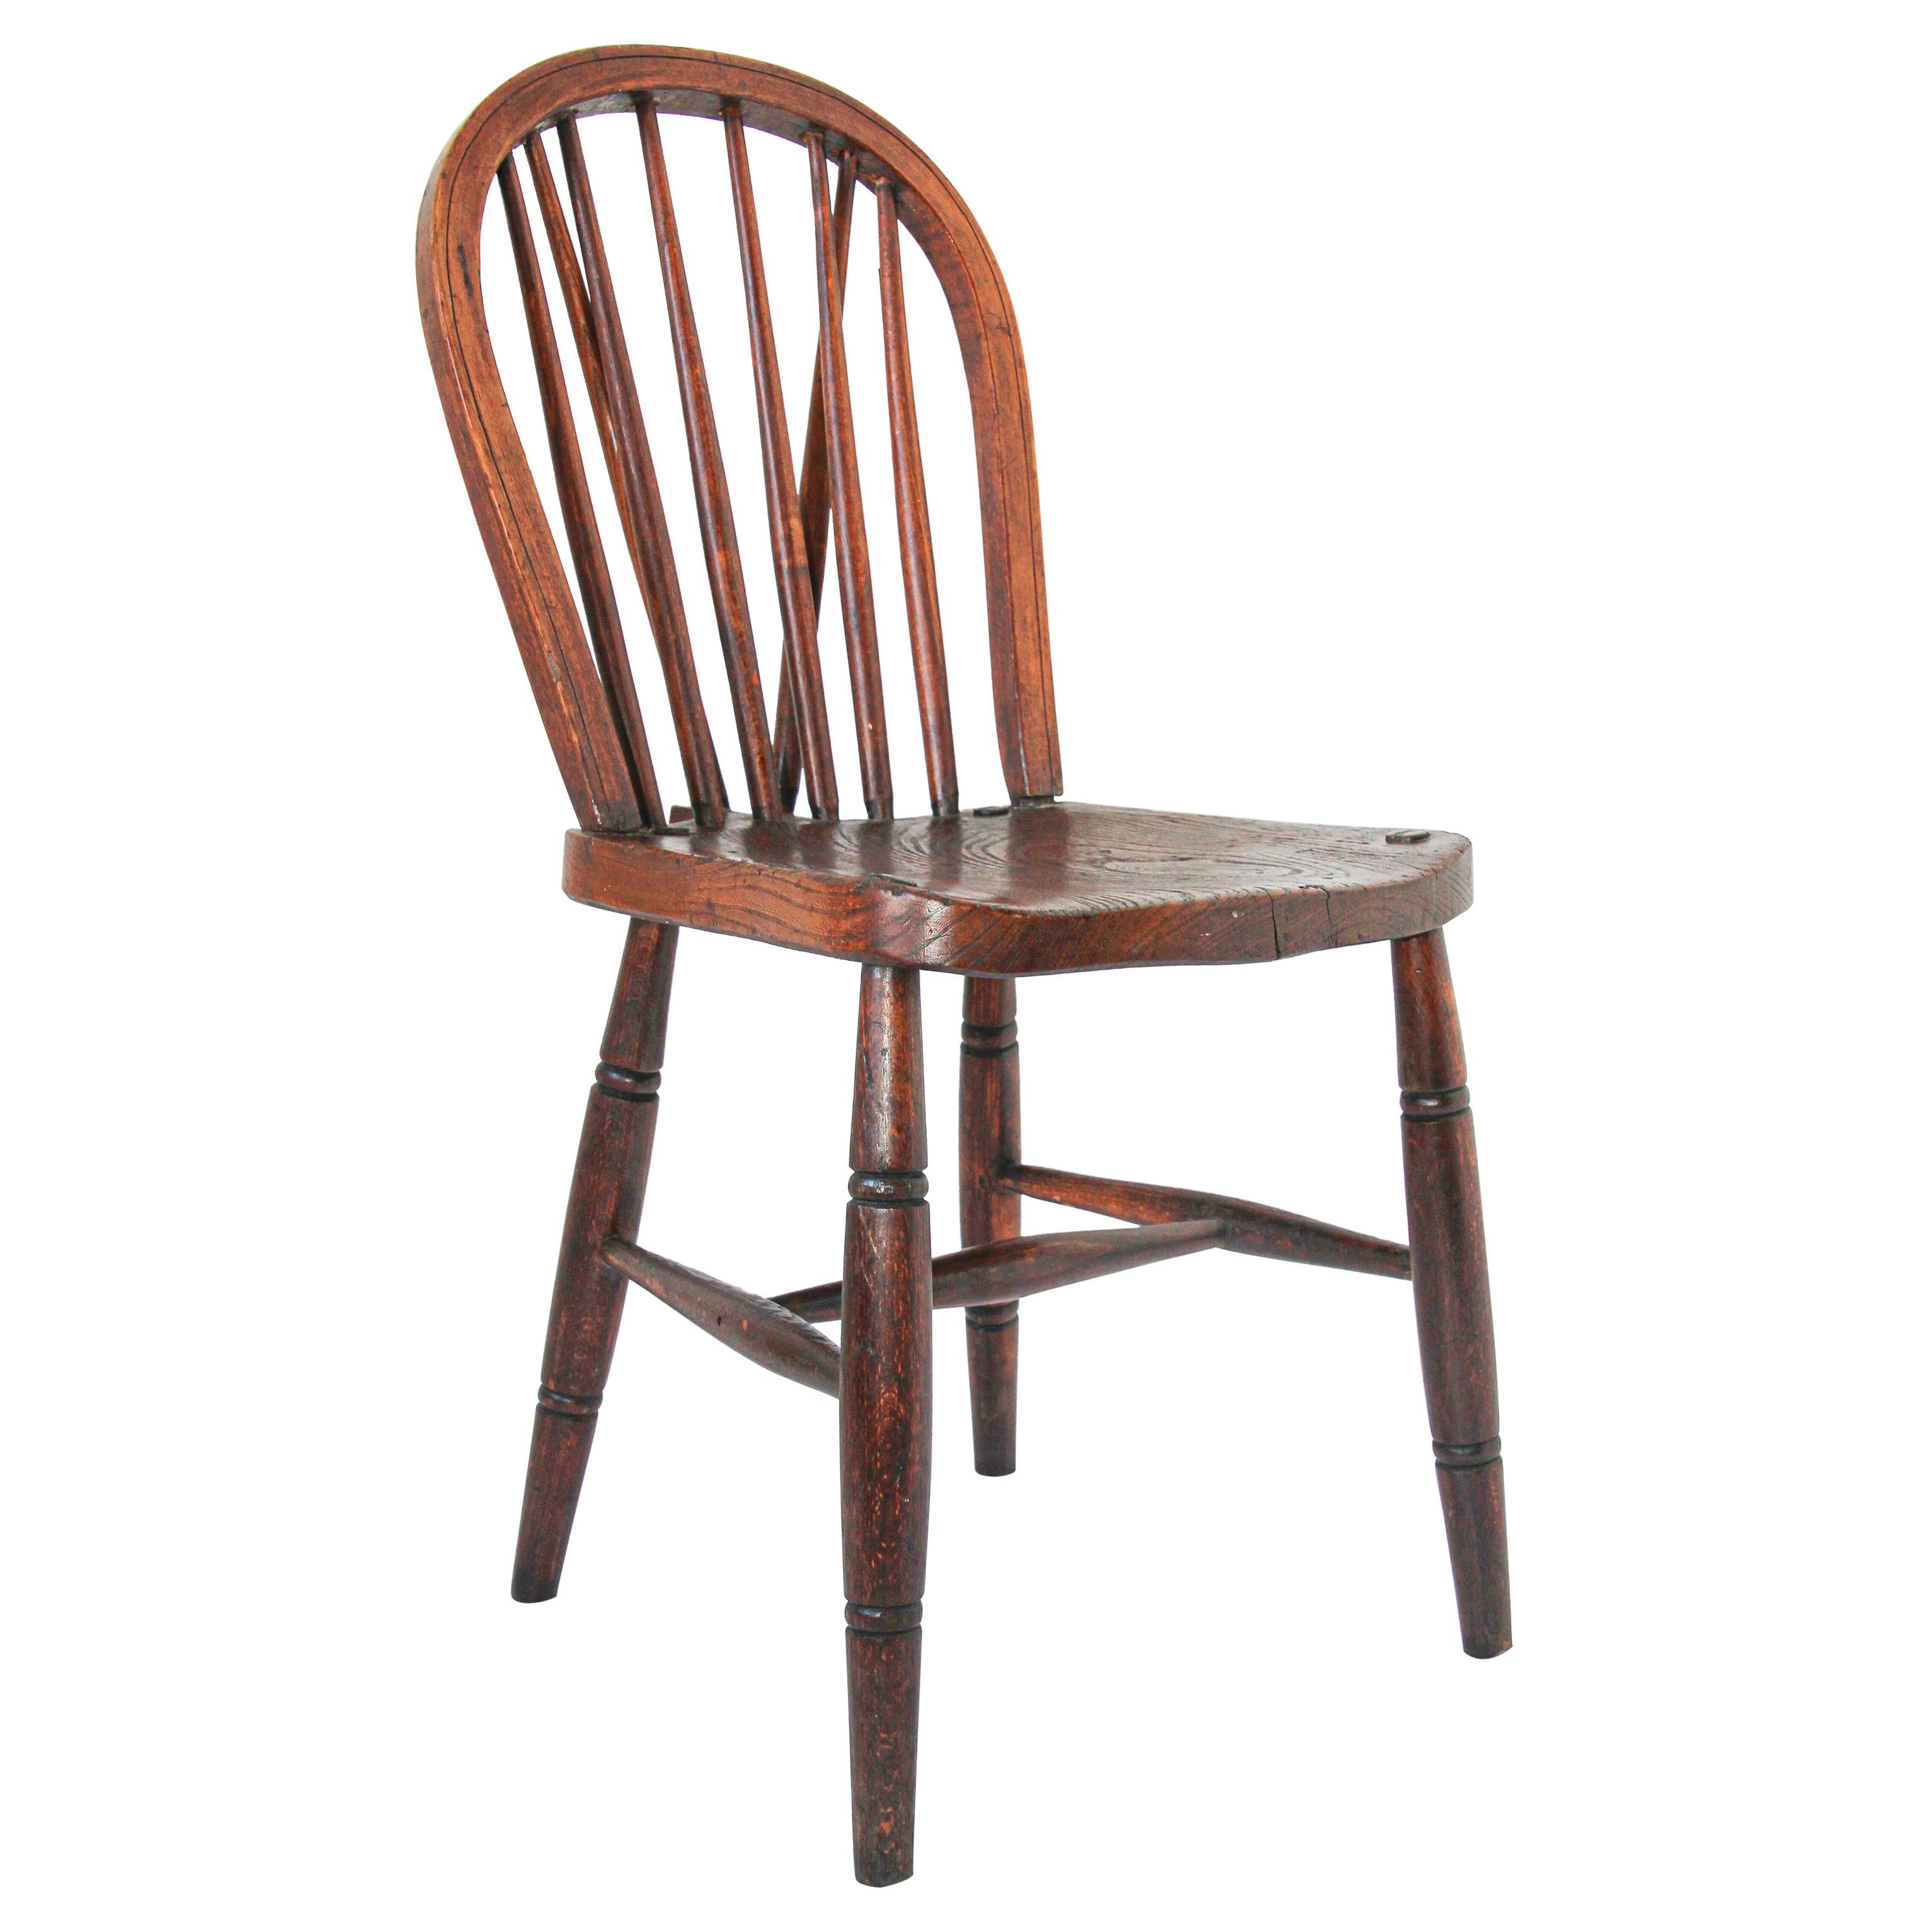 Victorian 1840 Hoop Back Windsor Chair High Wycombe